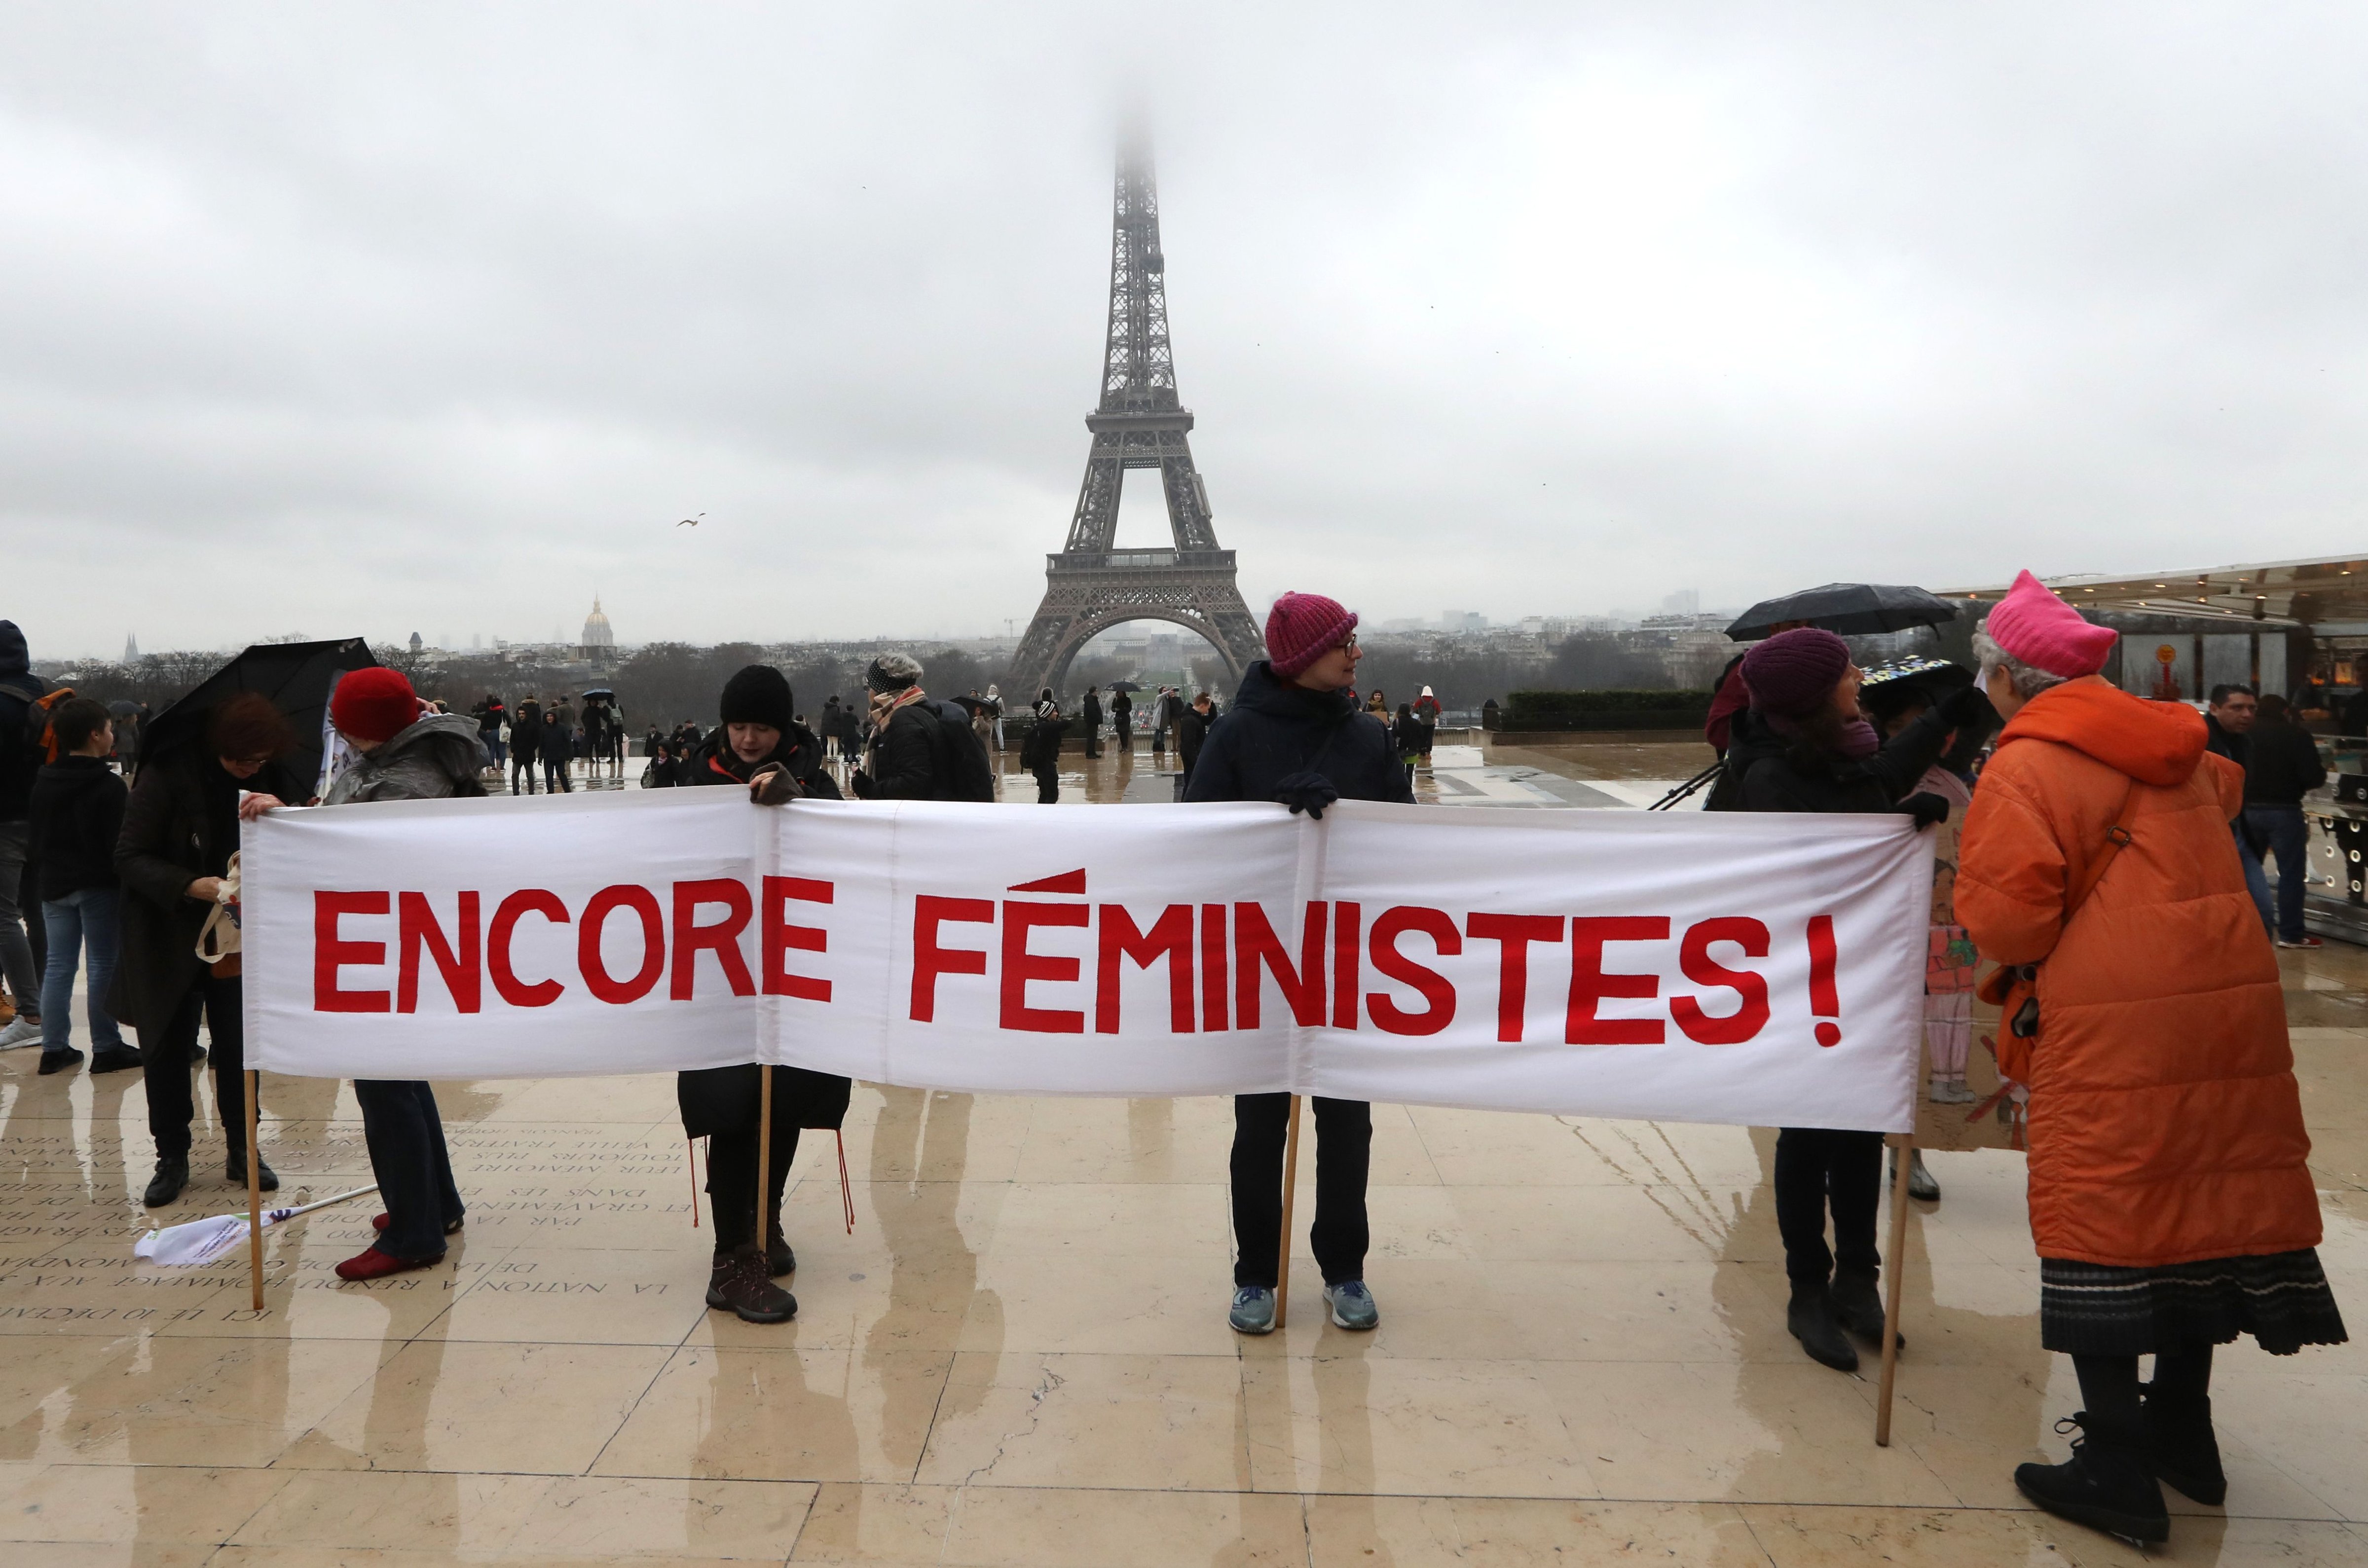 Women hold a banner reading "still feminist" with the Eiffel tower in background on the Trocadero esplanade in Paris on January 21, 2018 during a women's march organized as part of a global day of protests, a year to the day since Donald Trump took office as U.S. president. (JACQUES DEMARTHON—AFP/Getty Images)